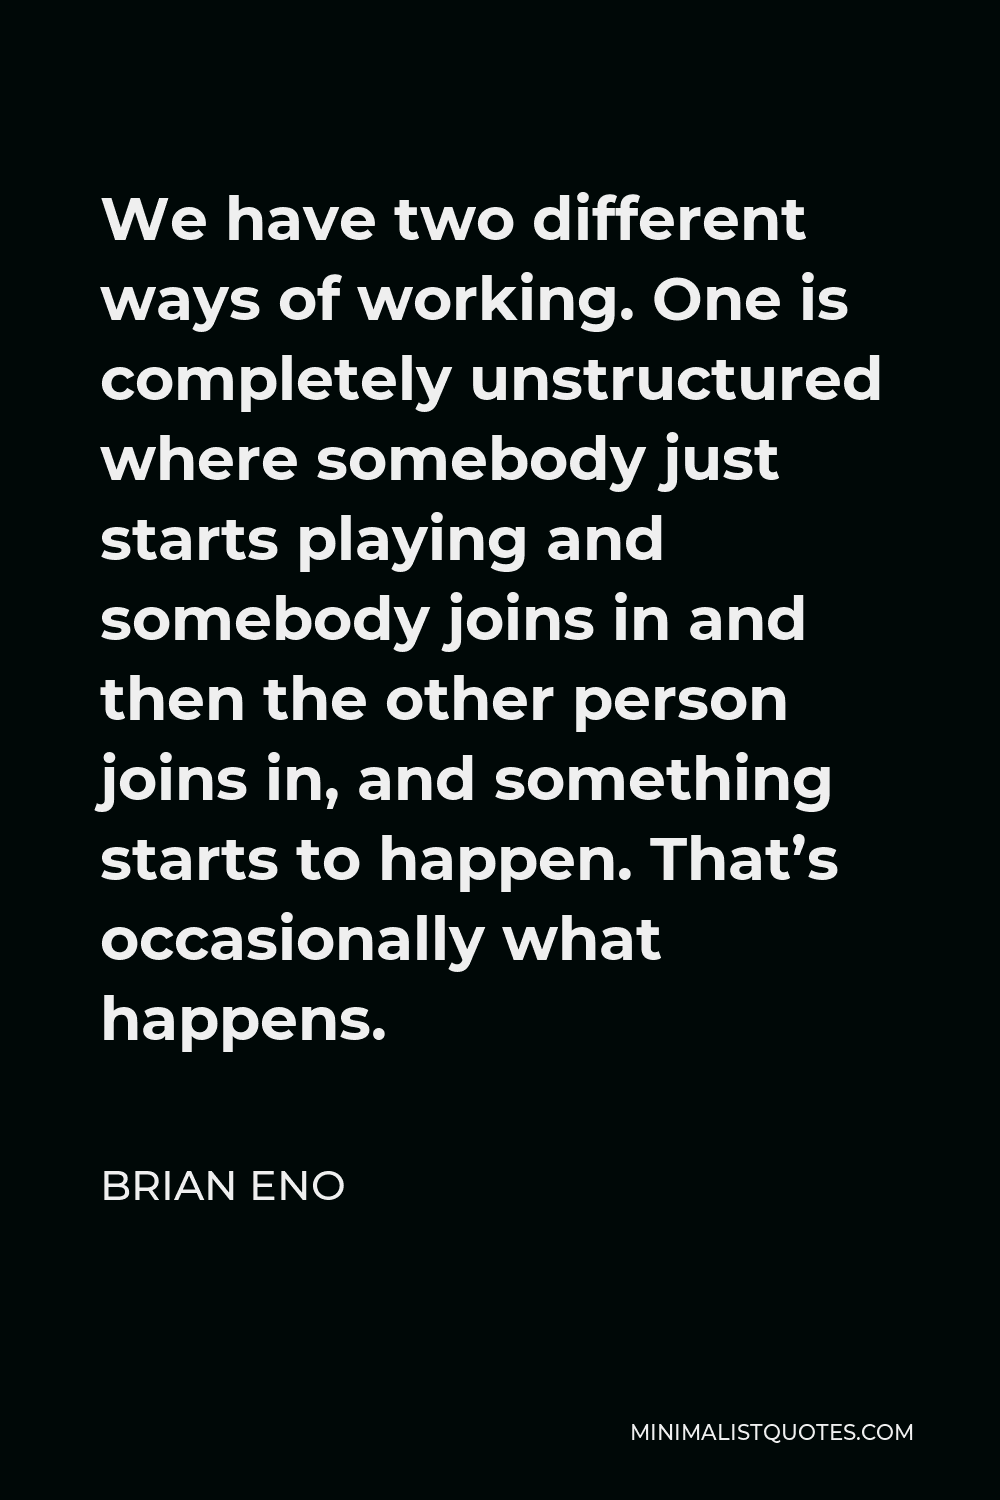 Brian Eno Quote - We have two different ways of working. One is completely unstructured where somebody just starts playing and somebody joins in and then the other person joins in, and something starts to happen. That’s occasionally what happens.